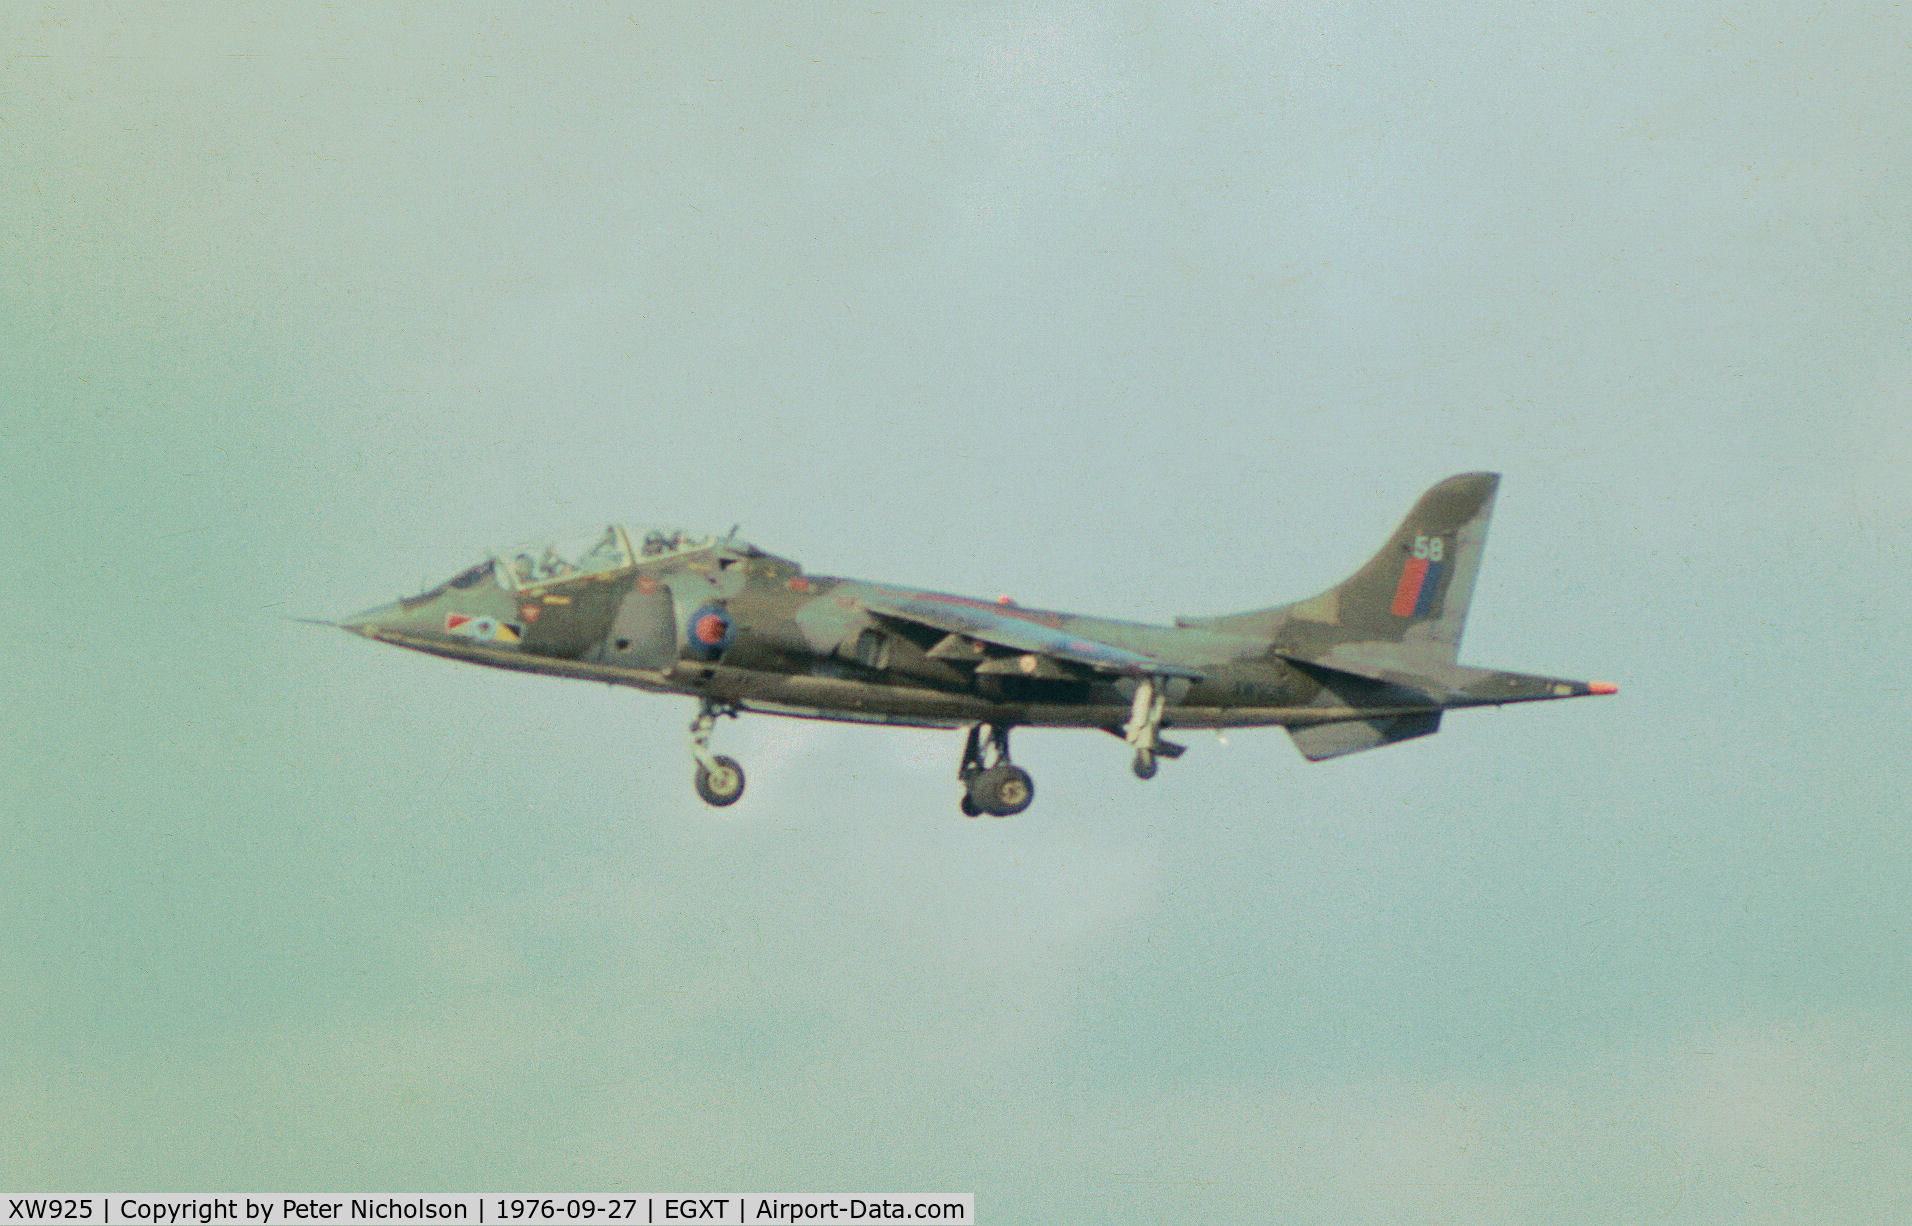 XW925, 1971 Hawker Siddeley Harrier T.2A C/N 212013, Harrier T.2A of 233 Operational Conversion Unit on final approach to RAF Wittering in September 1976.